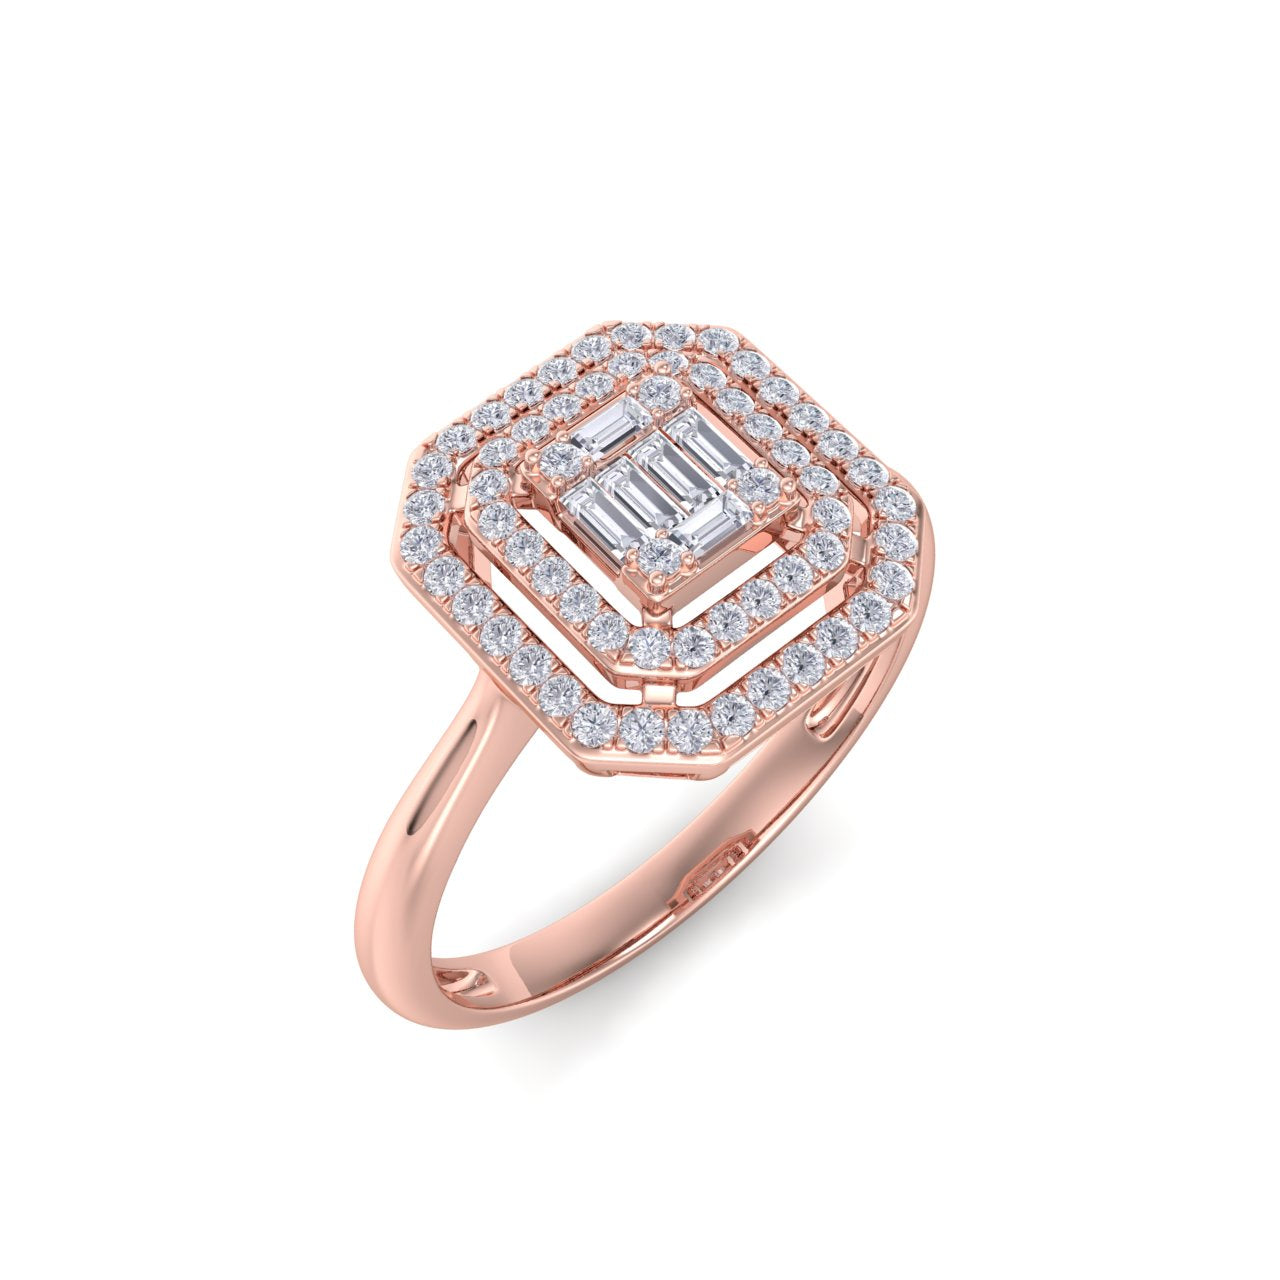 Square diamond ring in rose gold with white diamonds of 0.28 ct in weight